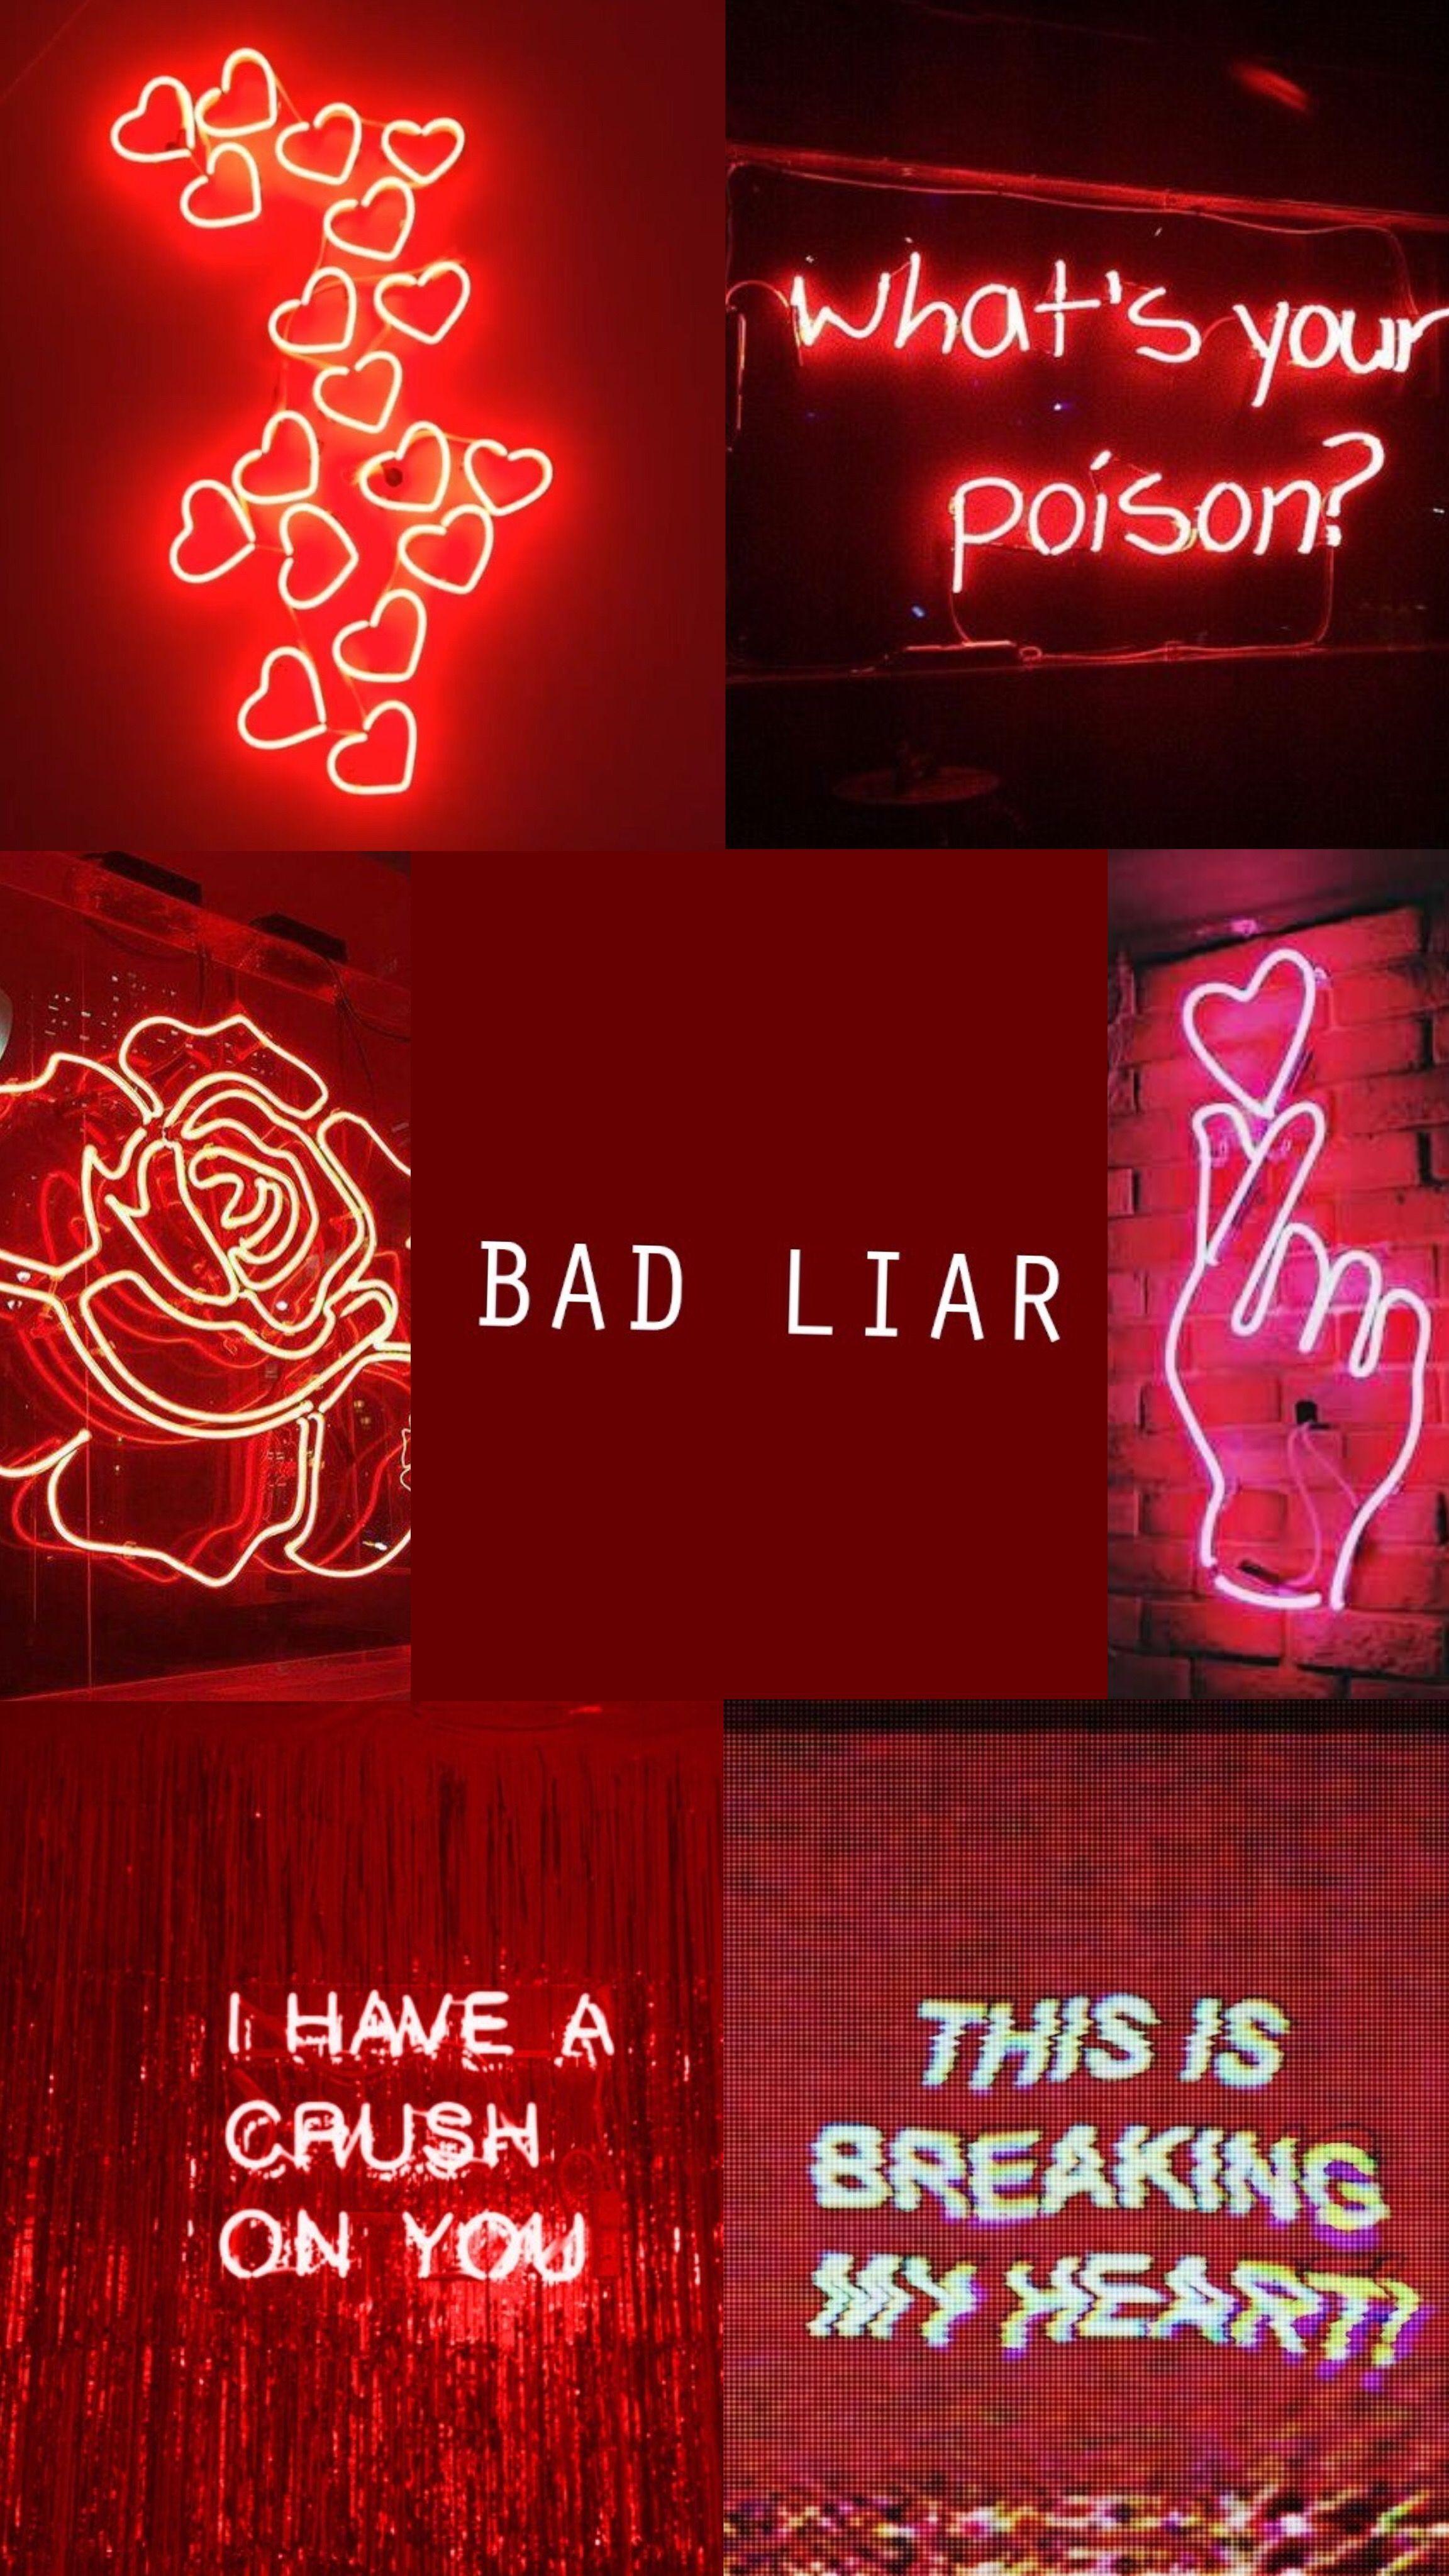 Bad Aesthetic Wallpapers - Top Free Bad Aesthetic Backgrounds ...